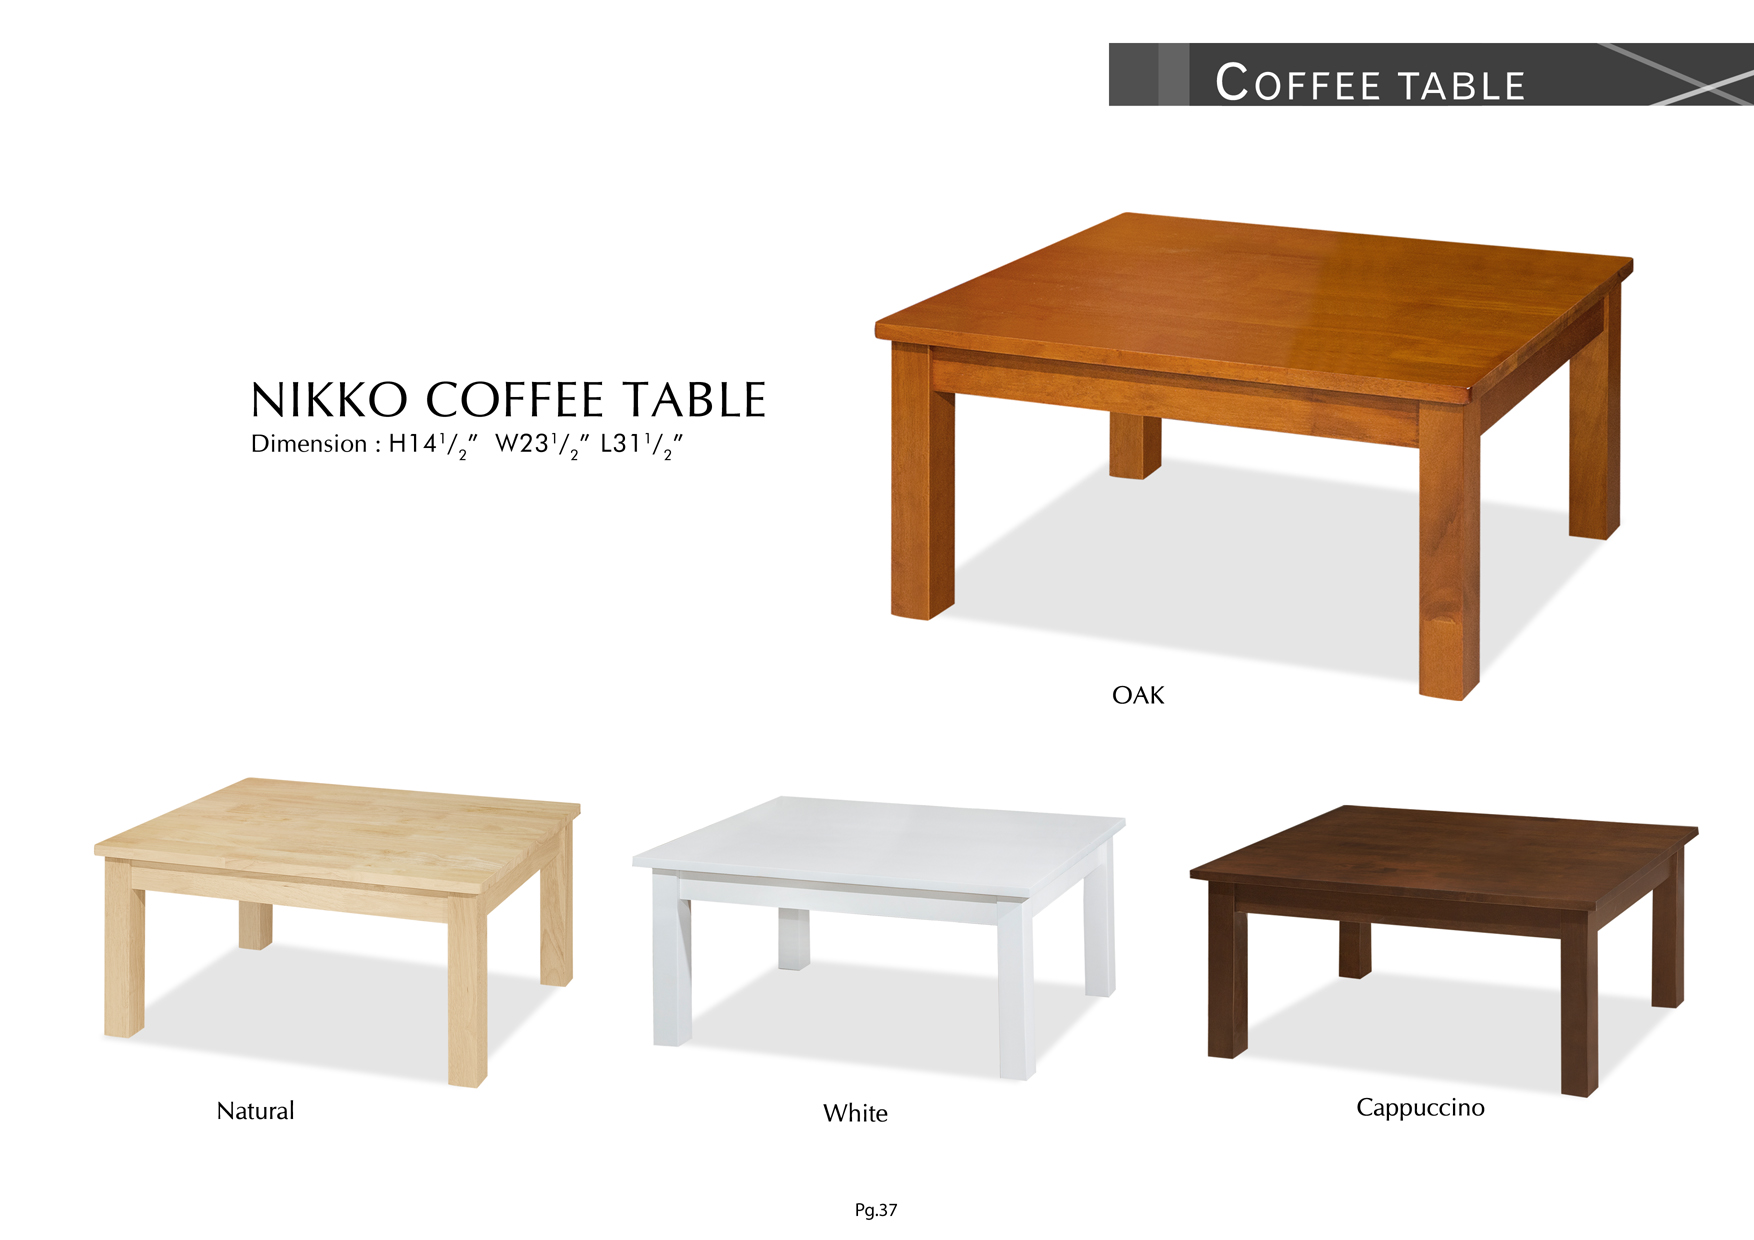 Product: PG37. NIKKO COFFEE TABLE